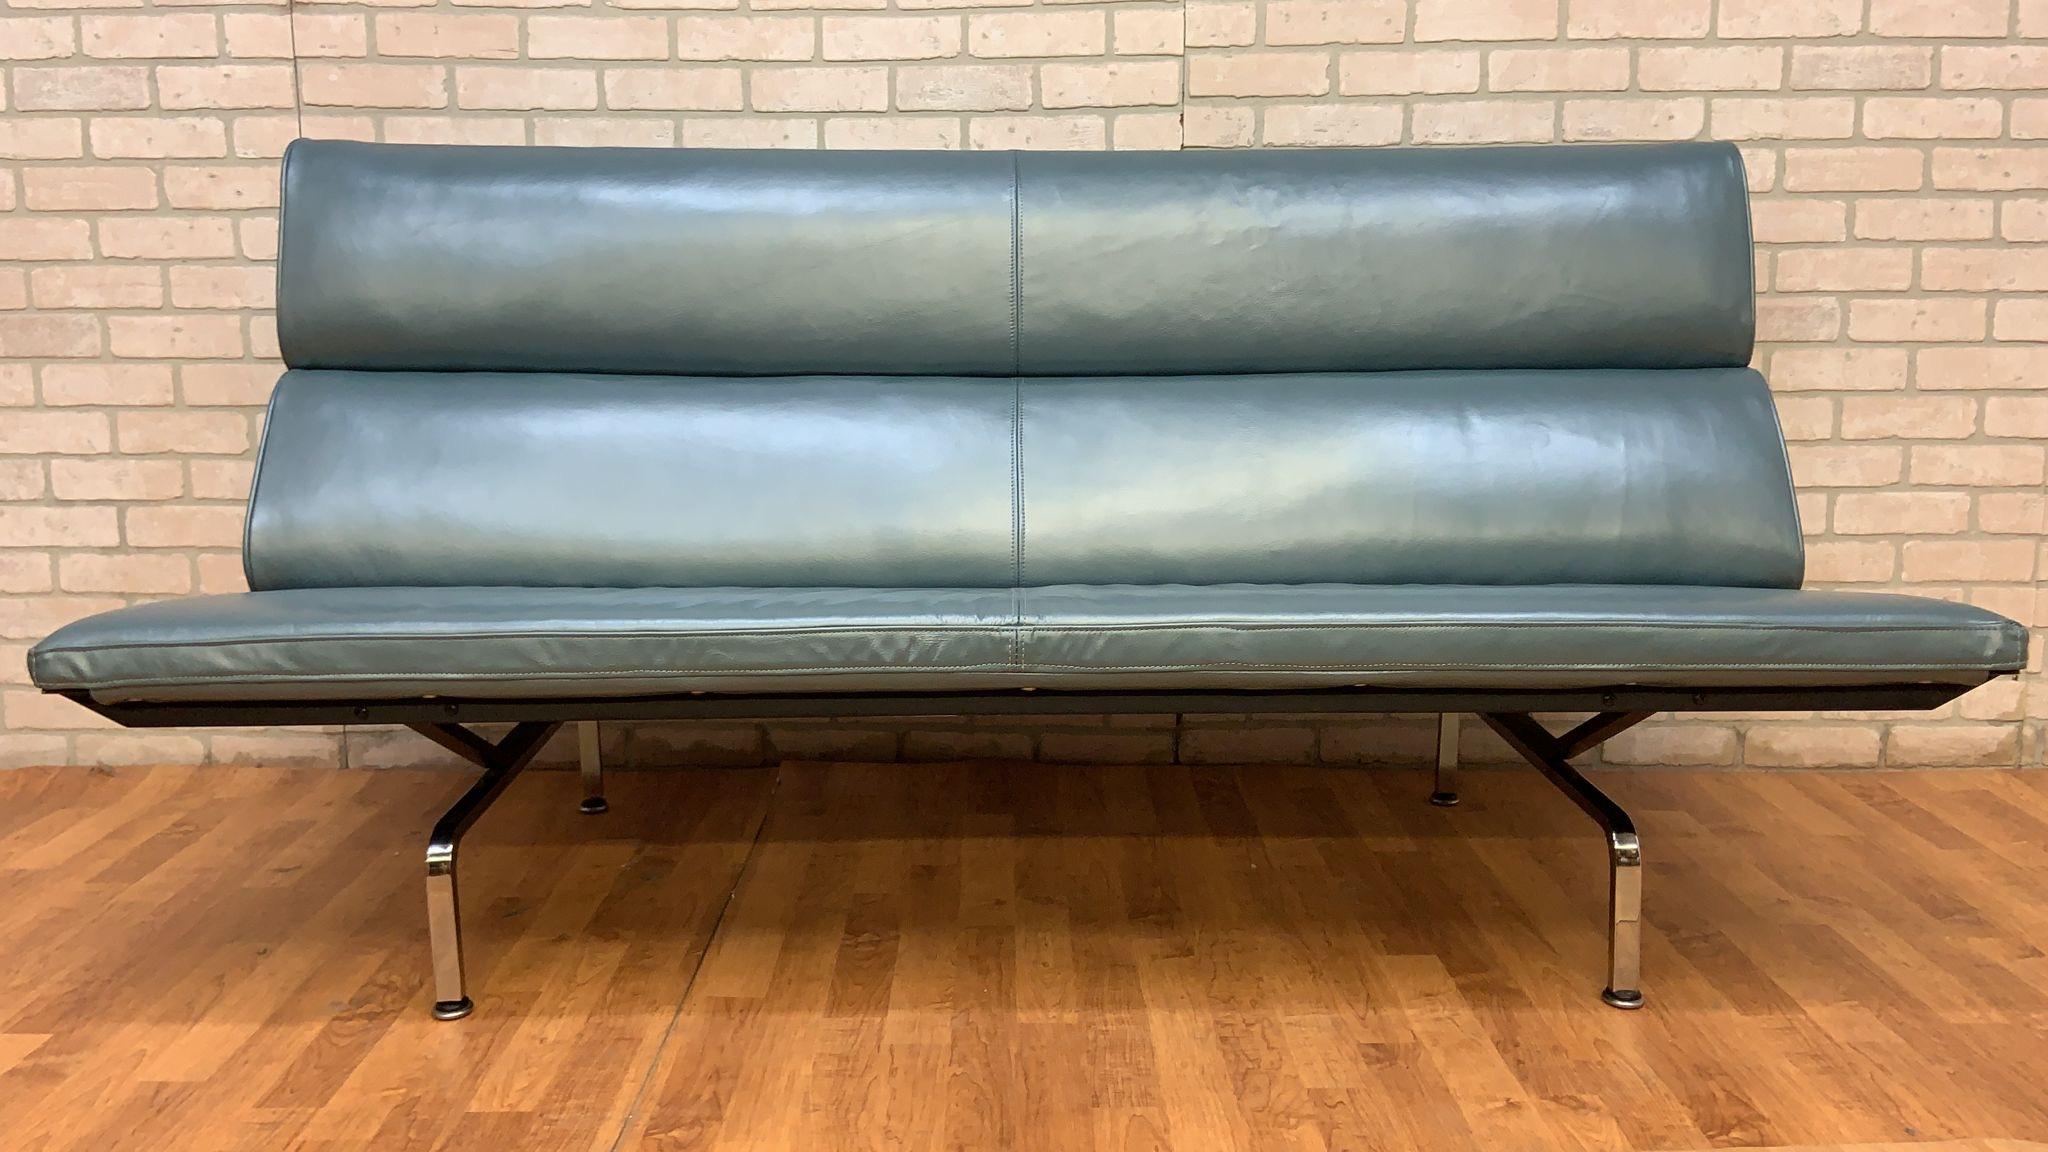 Vintage Compact Herman Miller Sofa Newly Upholstered in Metallic Teal Leather For Sale 1